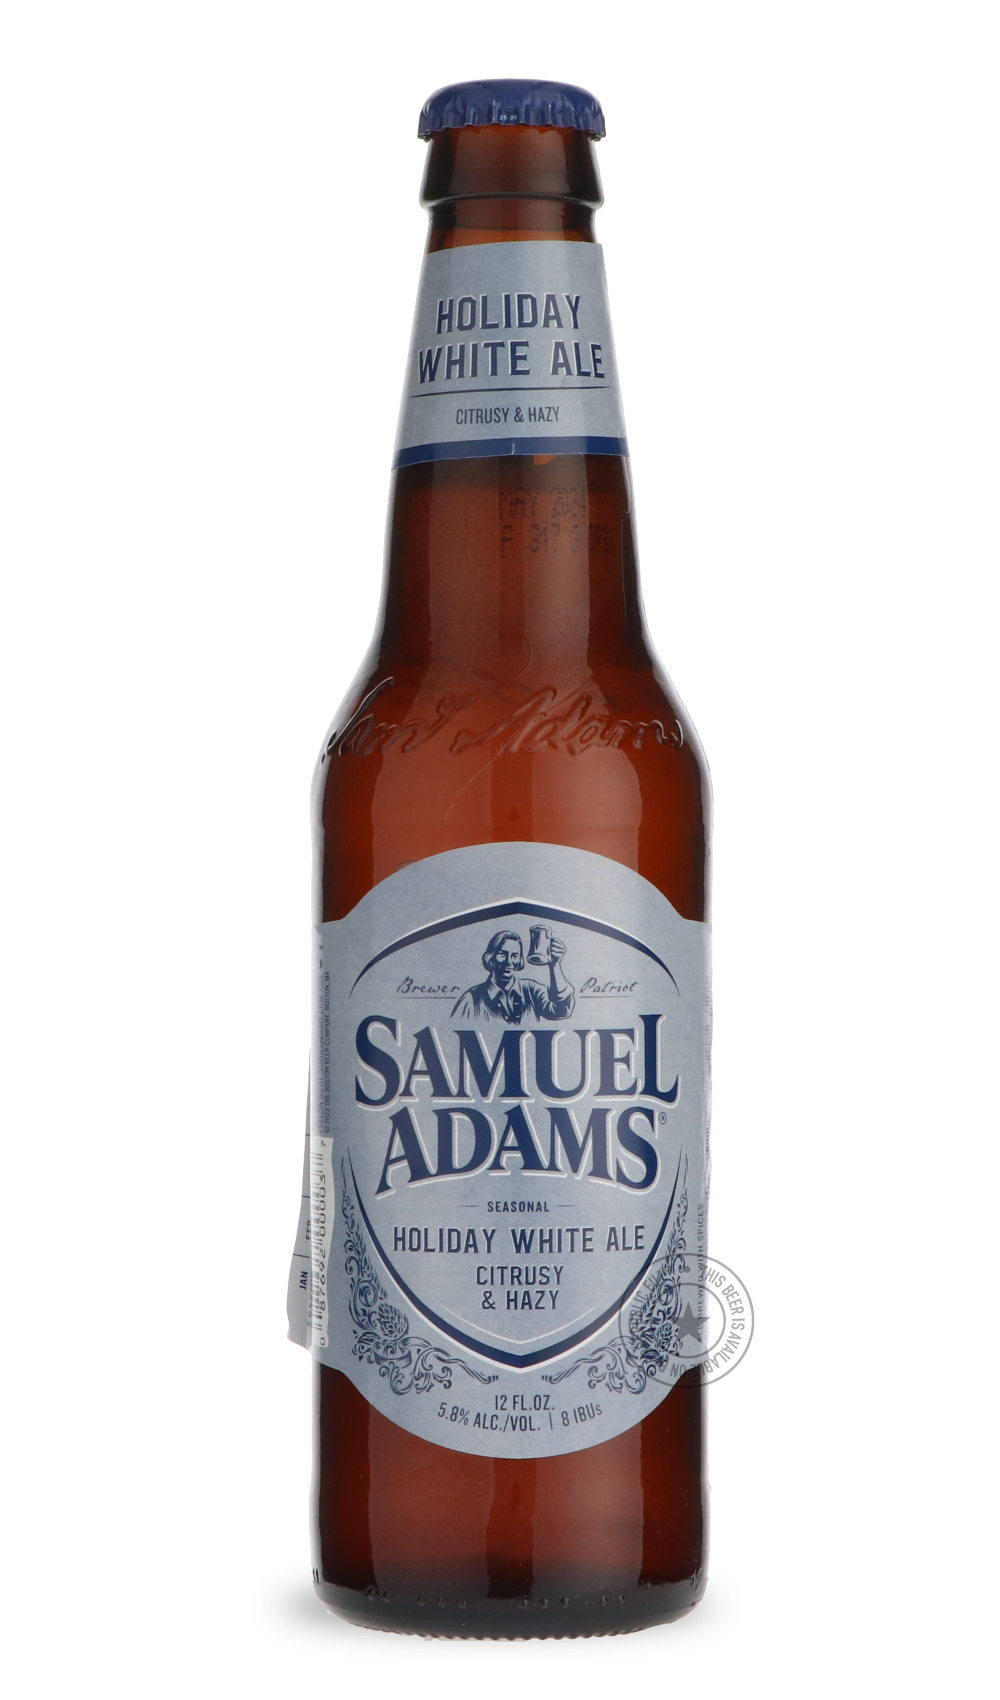 -Samuel Adams- Holiday White Ale-Pale- Only @ Beer Republic - The best online beer store for American & Canadian craft beer - Buy beer online from the USA and Canada - Bier online kopen - Amerikaans bier kopen - Craft beer store - Craft beer kopen - Amerikanisch bier kaufen - Bier online kaufen - Acheter biere online - IPA - Stout - Porter - New England IPA - Hazy IPA - Imperial Stout - Barrel Aged - Barrel Aged Imperial Stout - Brown - Dark beer - Blond - Blonde - Pilsner - Lager - Wheat - Weizen - Amber -